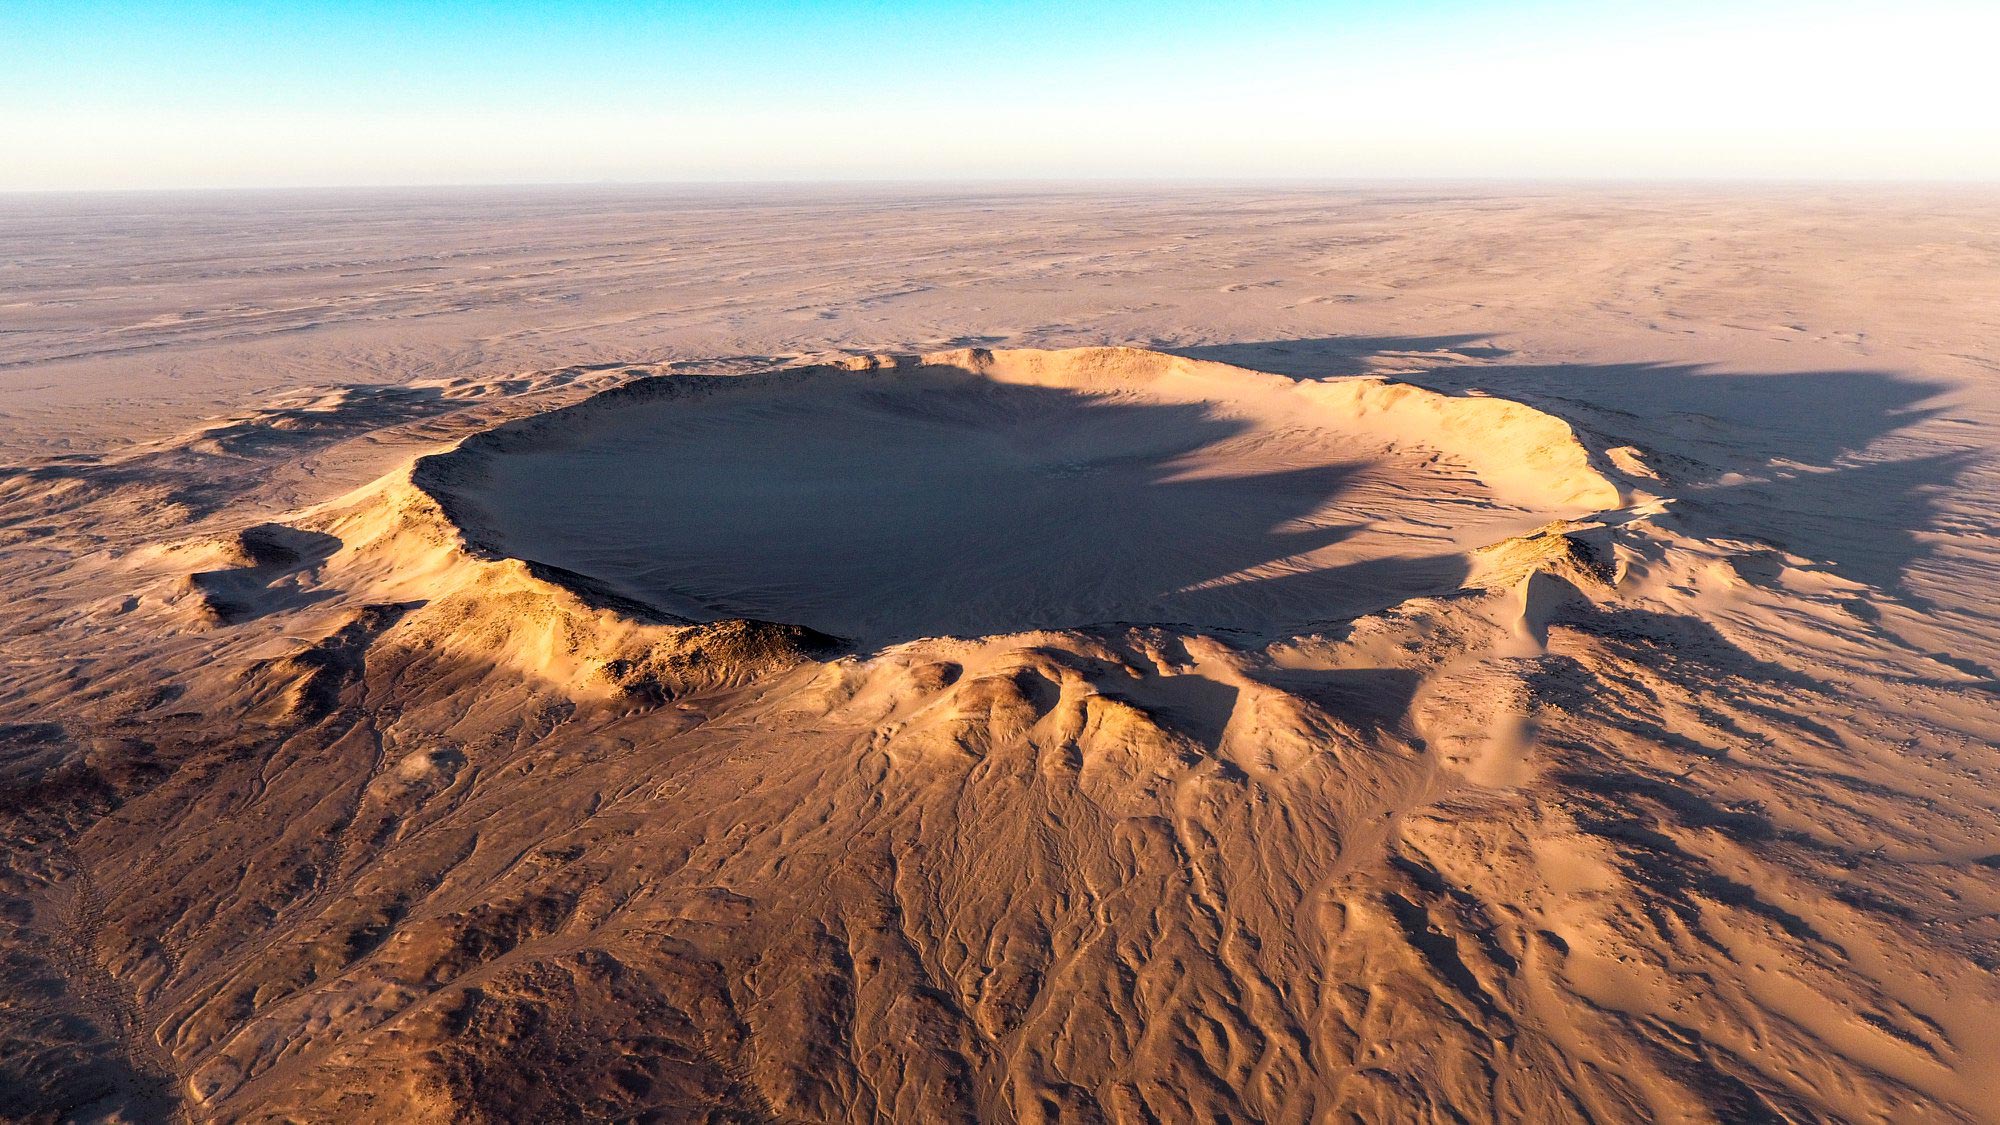 Tenoumer Crater, Mauritania – One of the Best-Preserved Craters on Earth - SciTechDaily